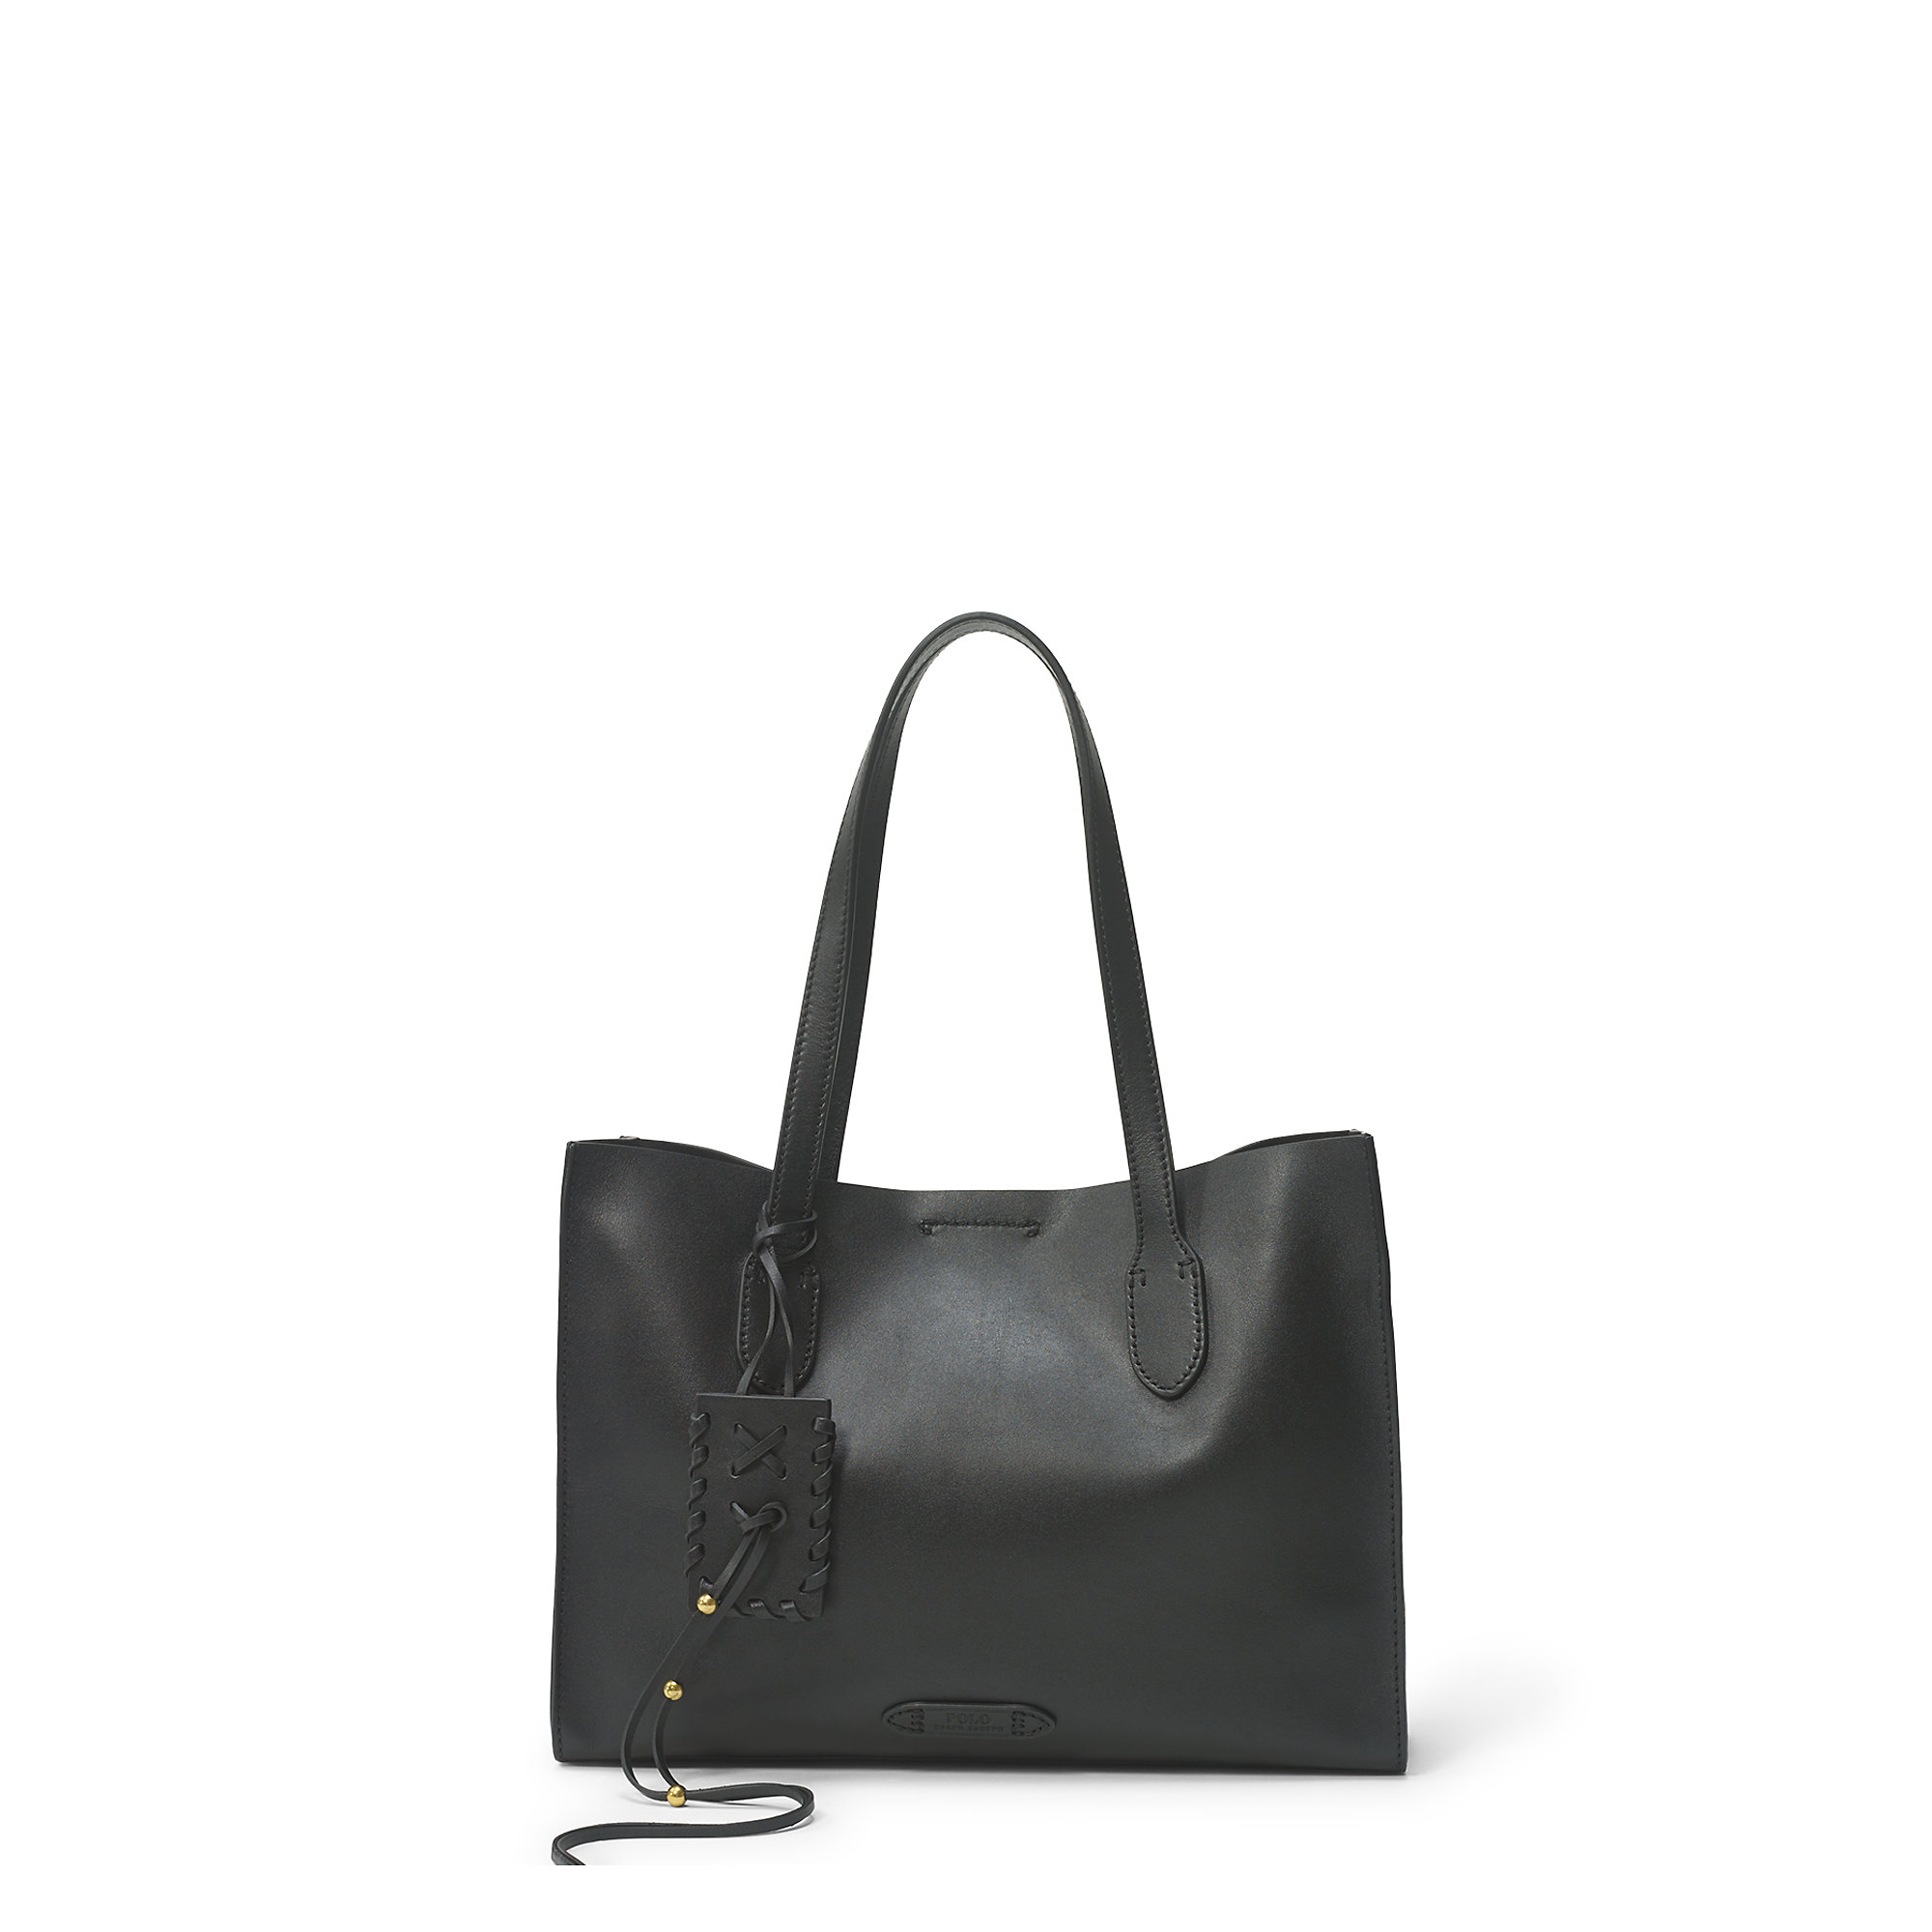 Polo Ralph Lauren Leather Tote in Black - Lyst